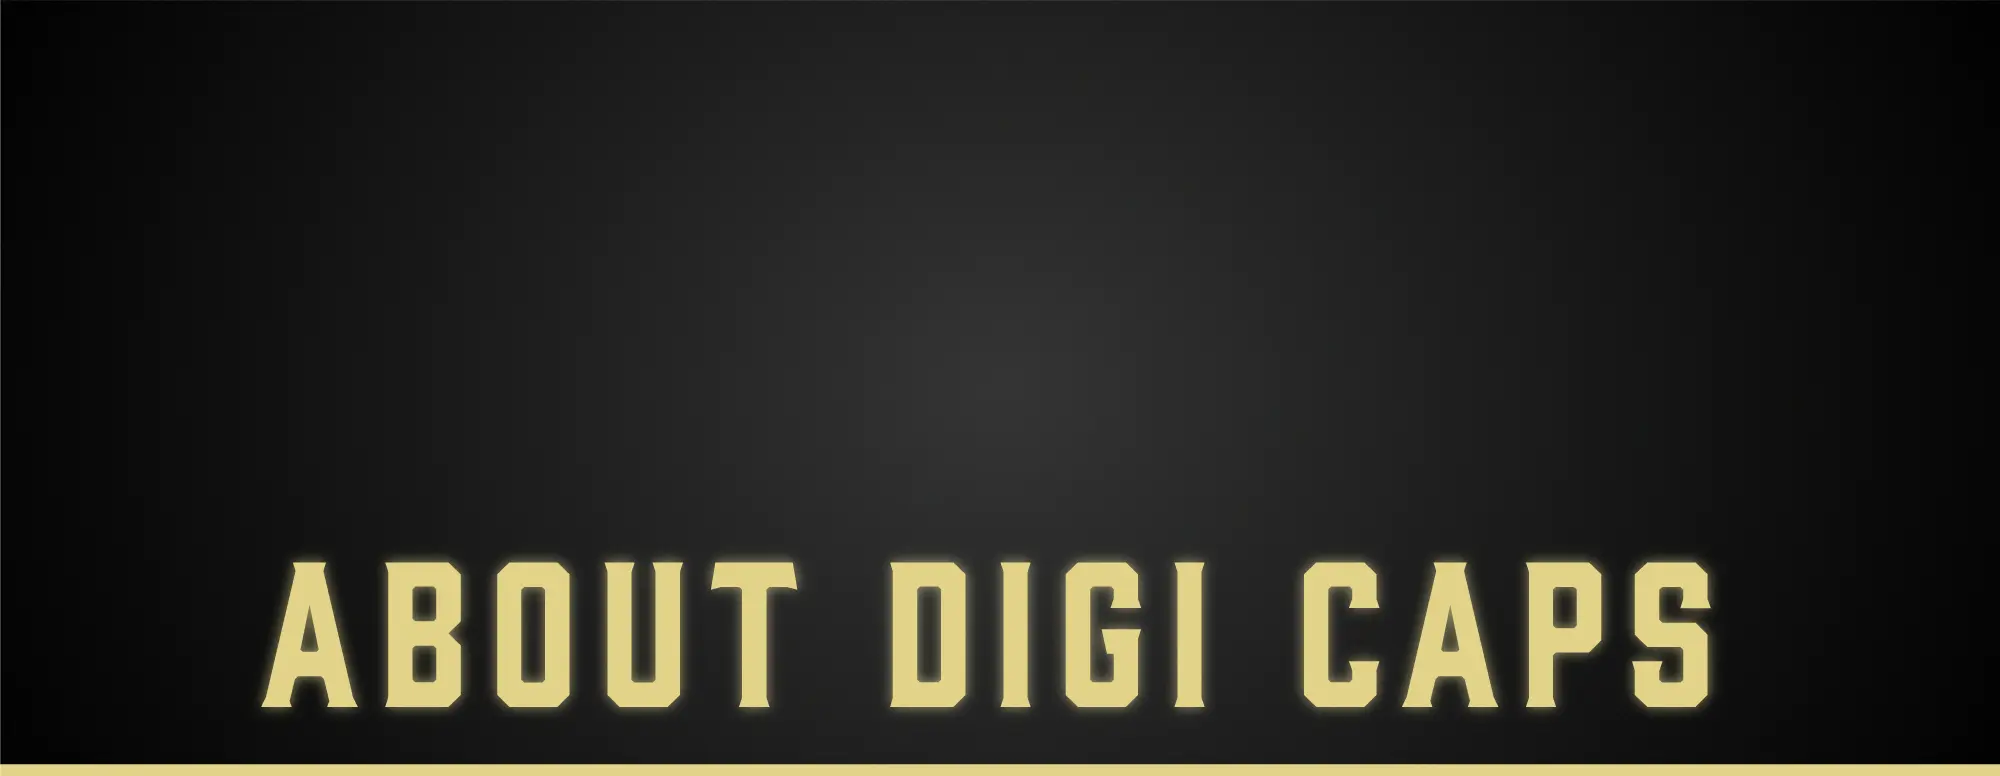 About our Crypto Project by Digi Caps NFT Collection on OpenSea. Digi Caps NFT Project